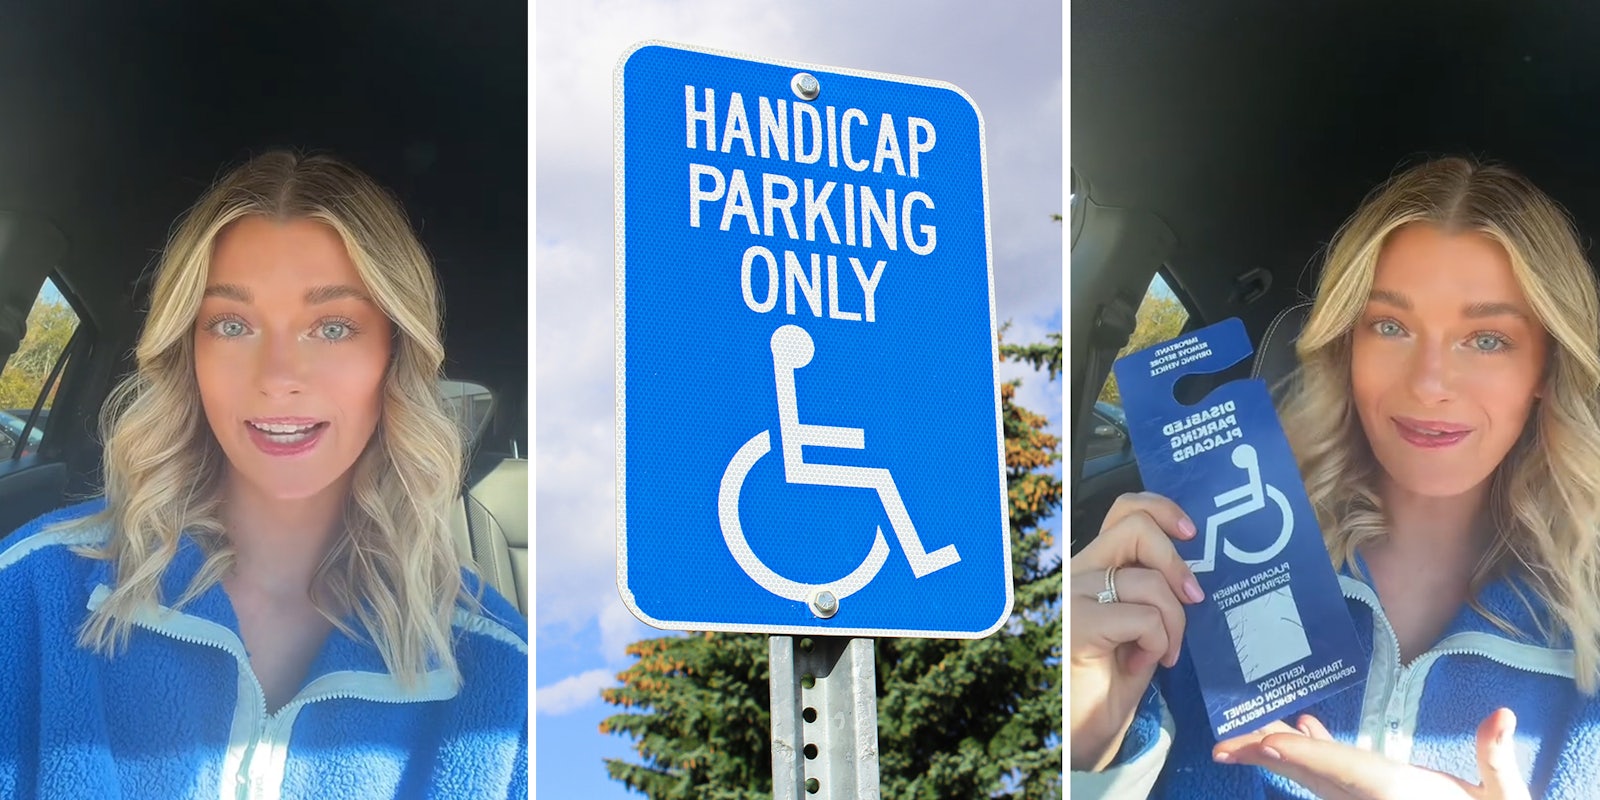 Woman with hidden disability says a woman stood in handicap parking spot to block her from using it